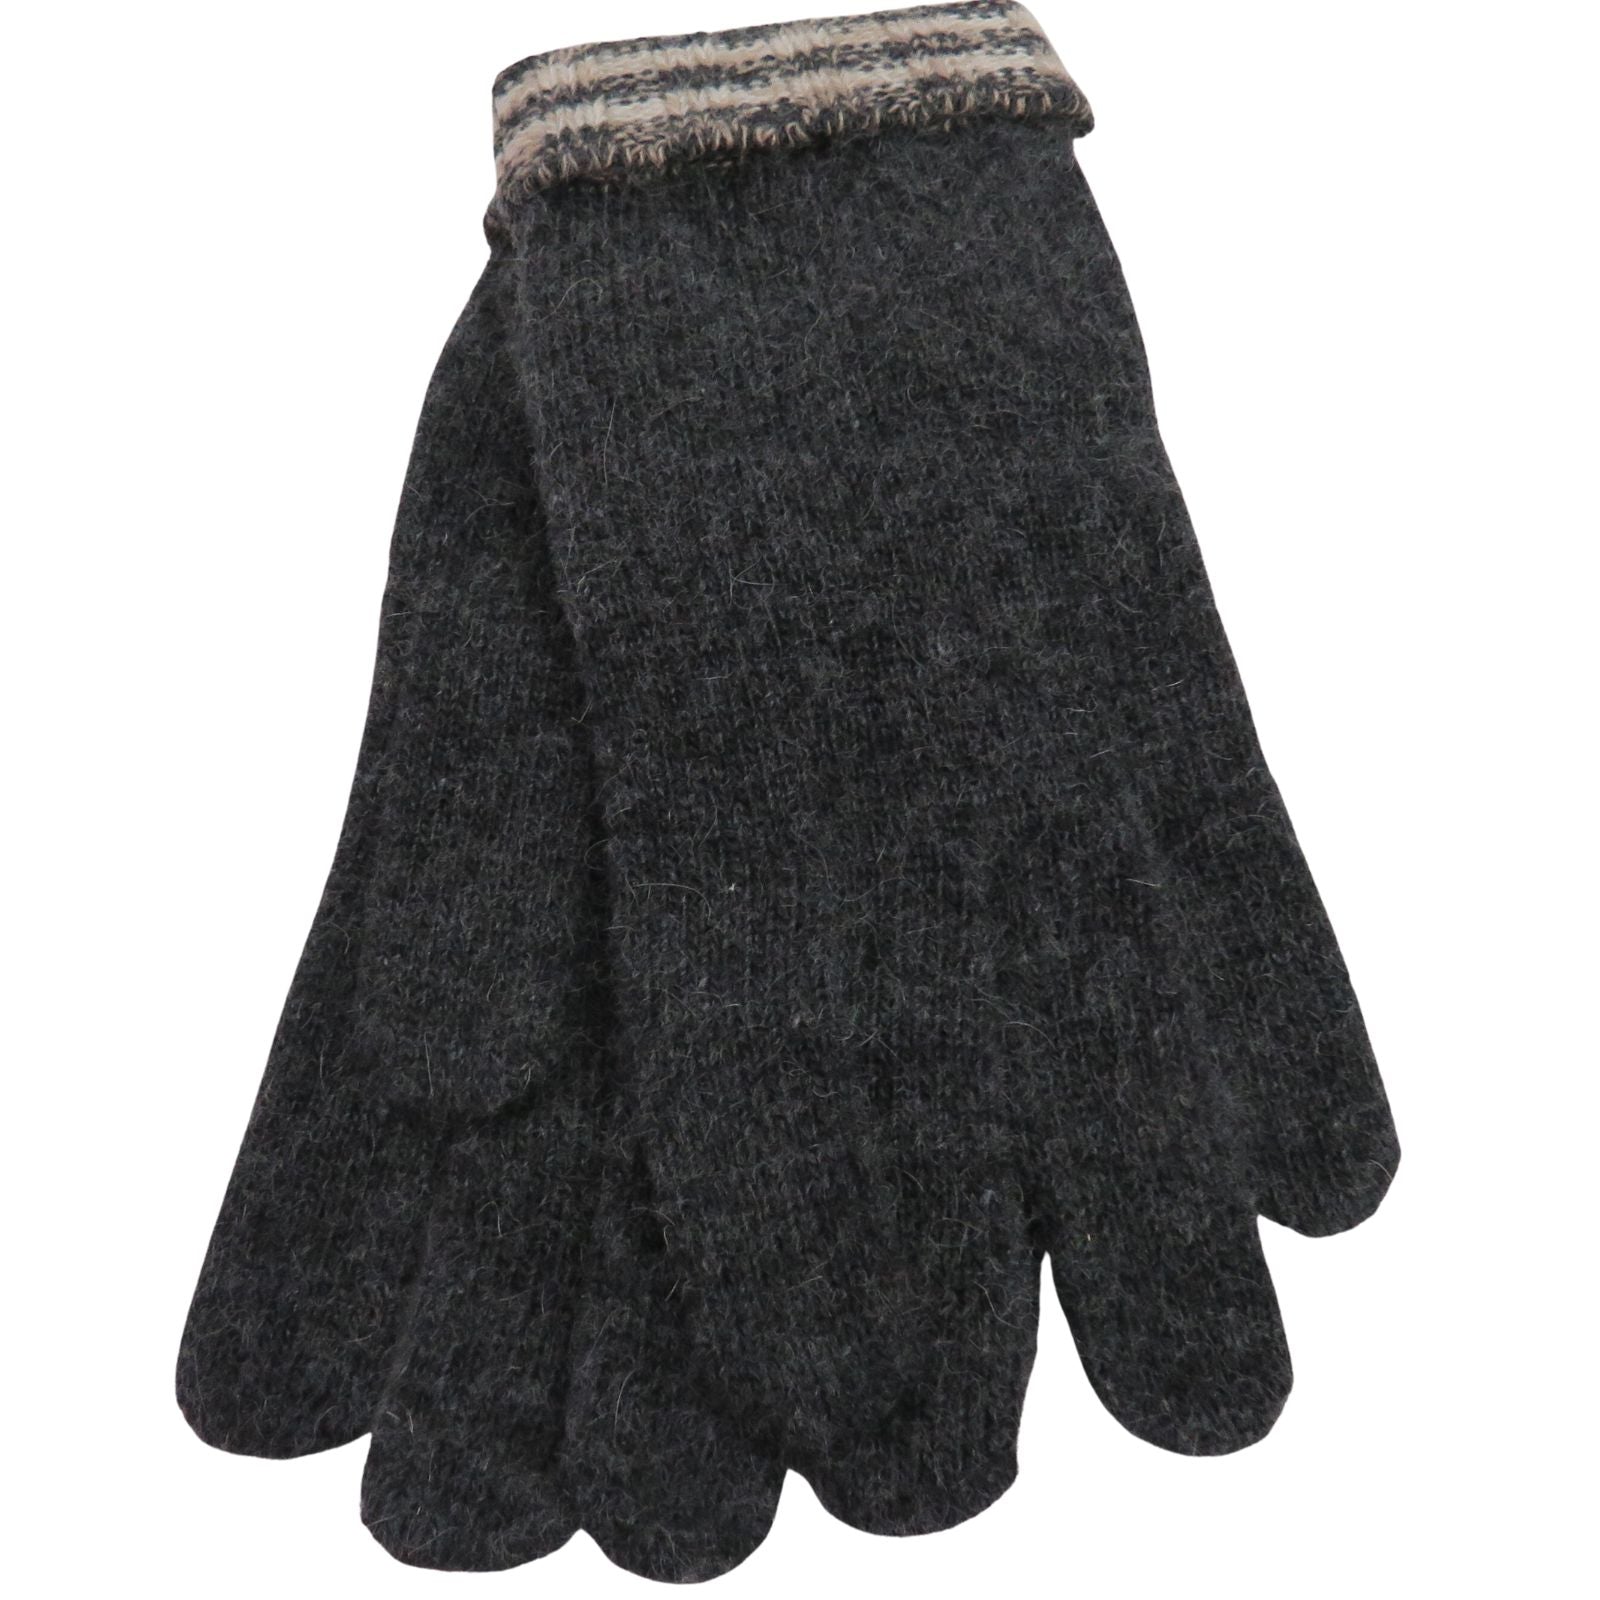 Knitted Glove with Oatmeal Cuff